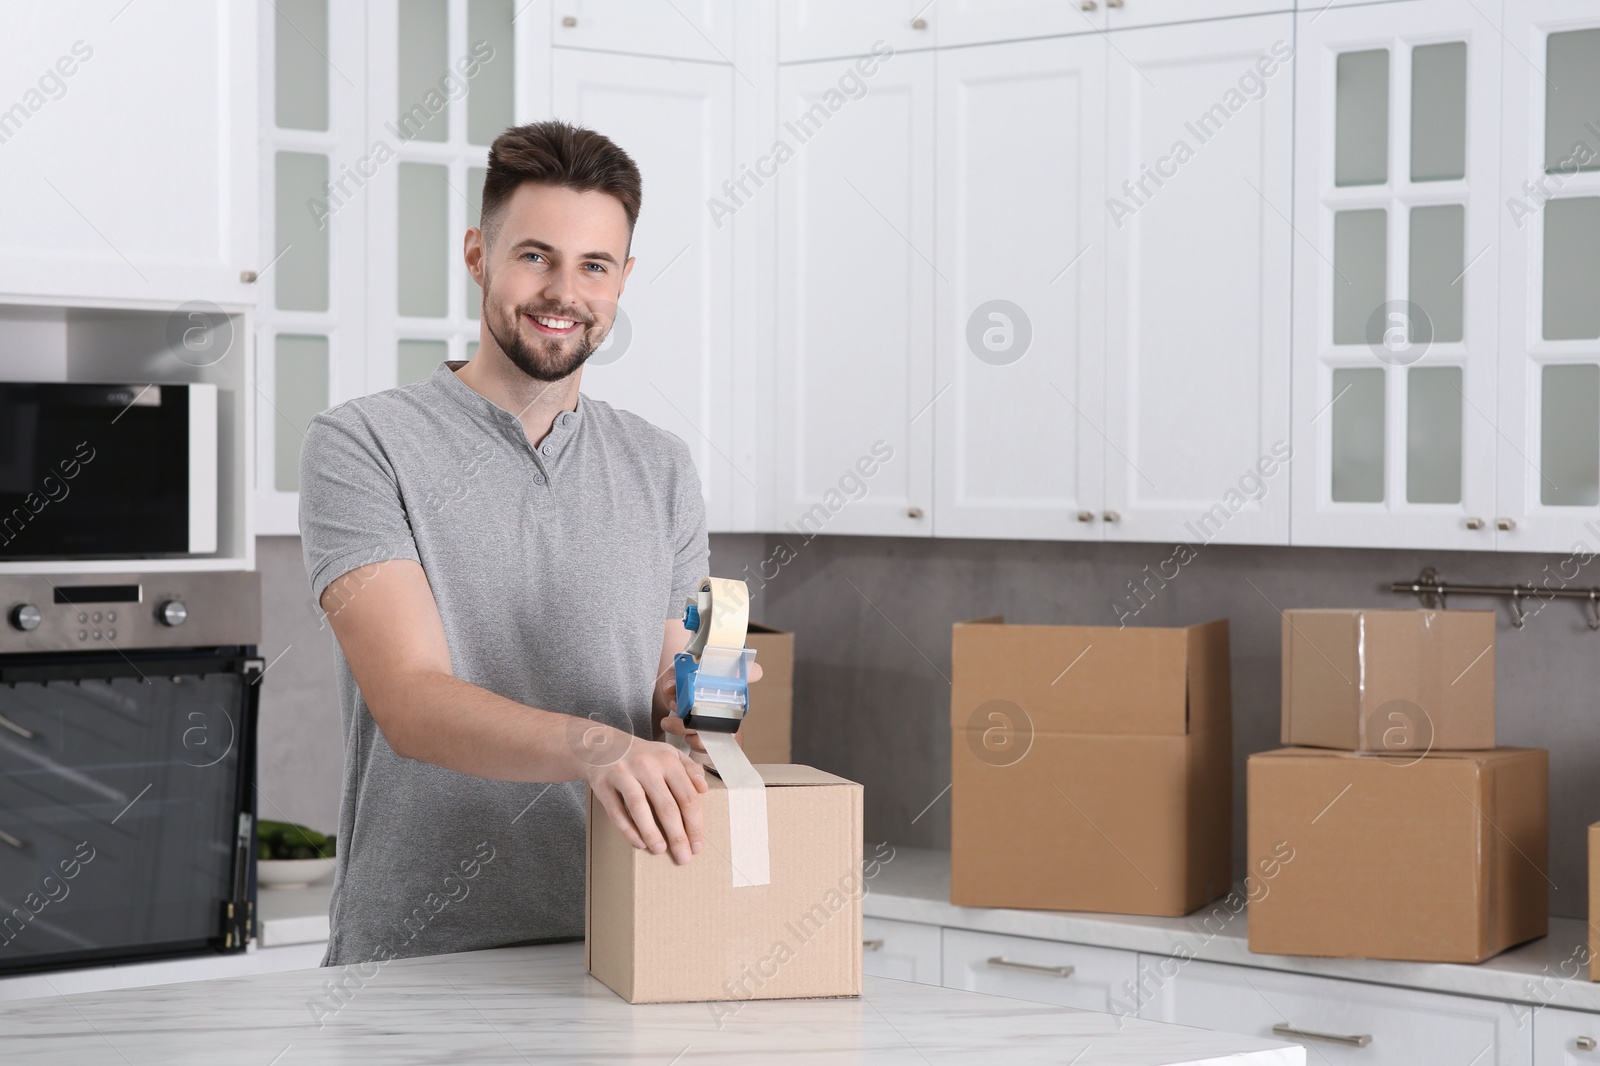 Photo of Smiling man taping box with adhesive tape dispenser in kitchen, space for text